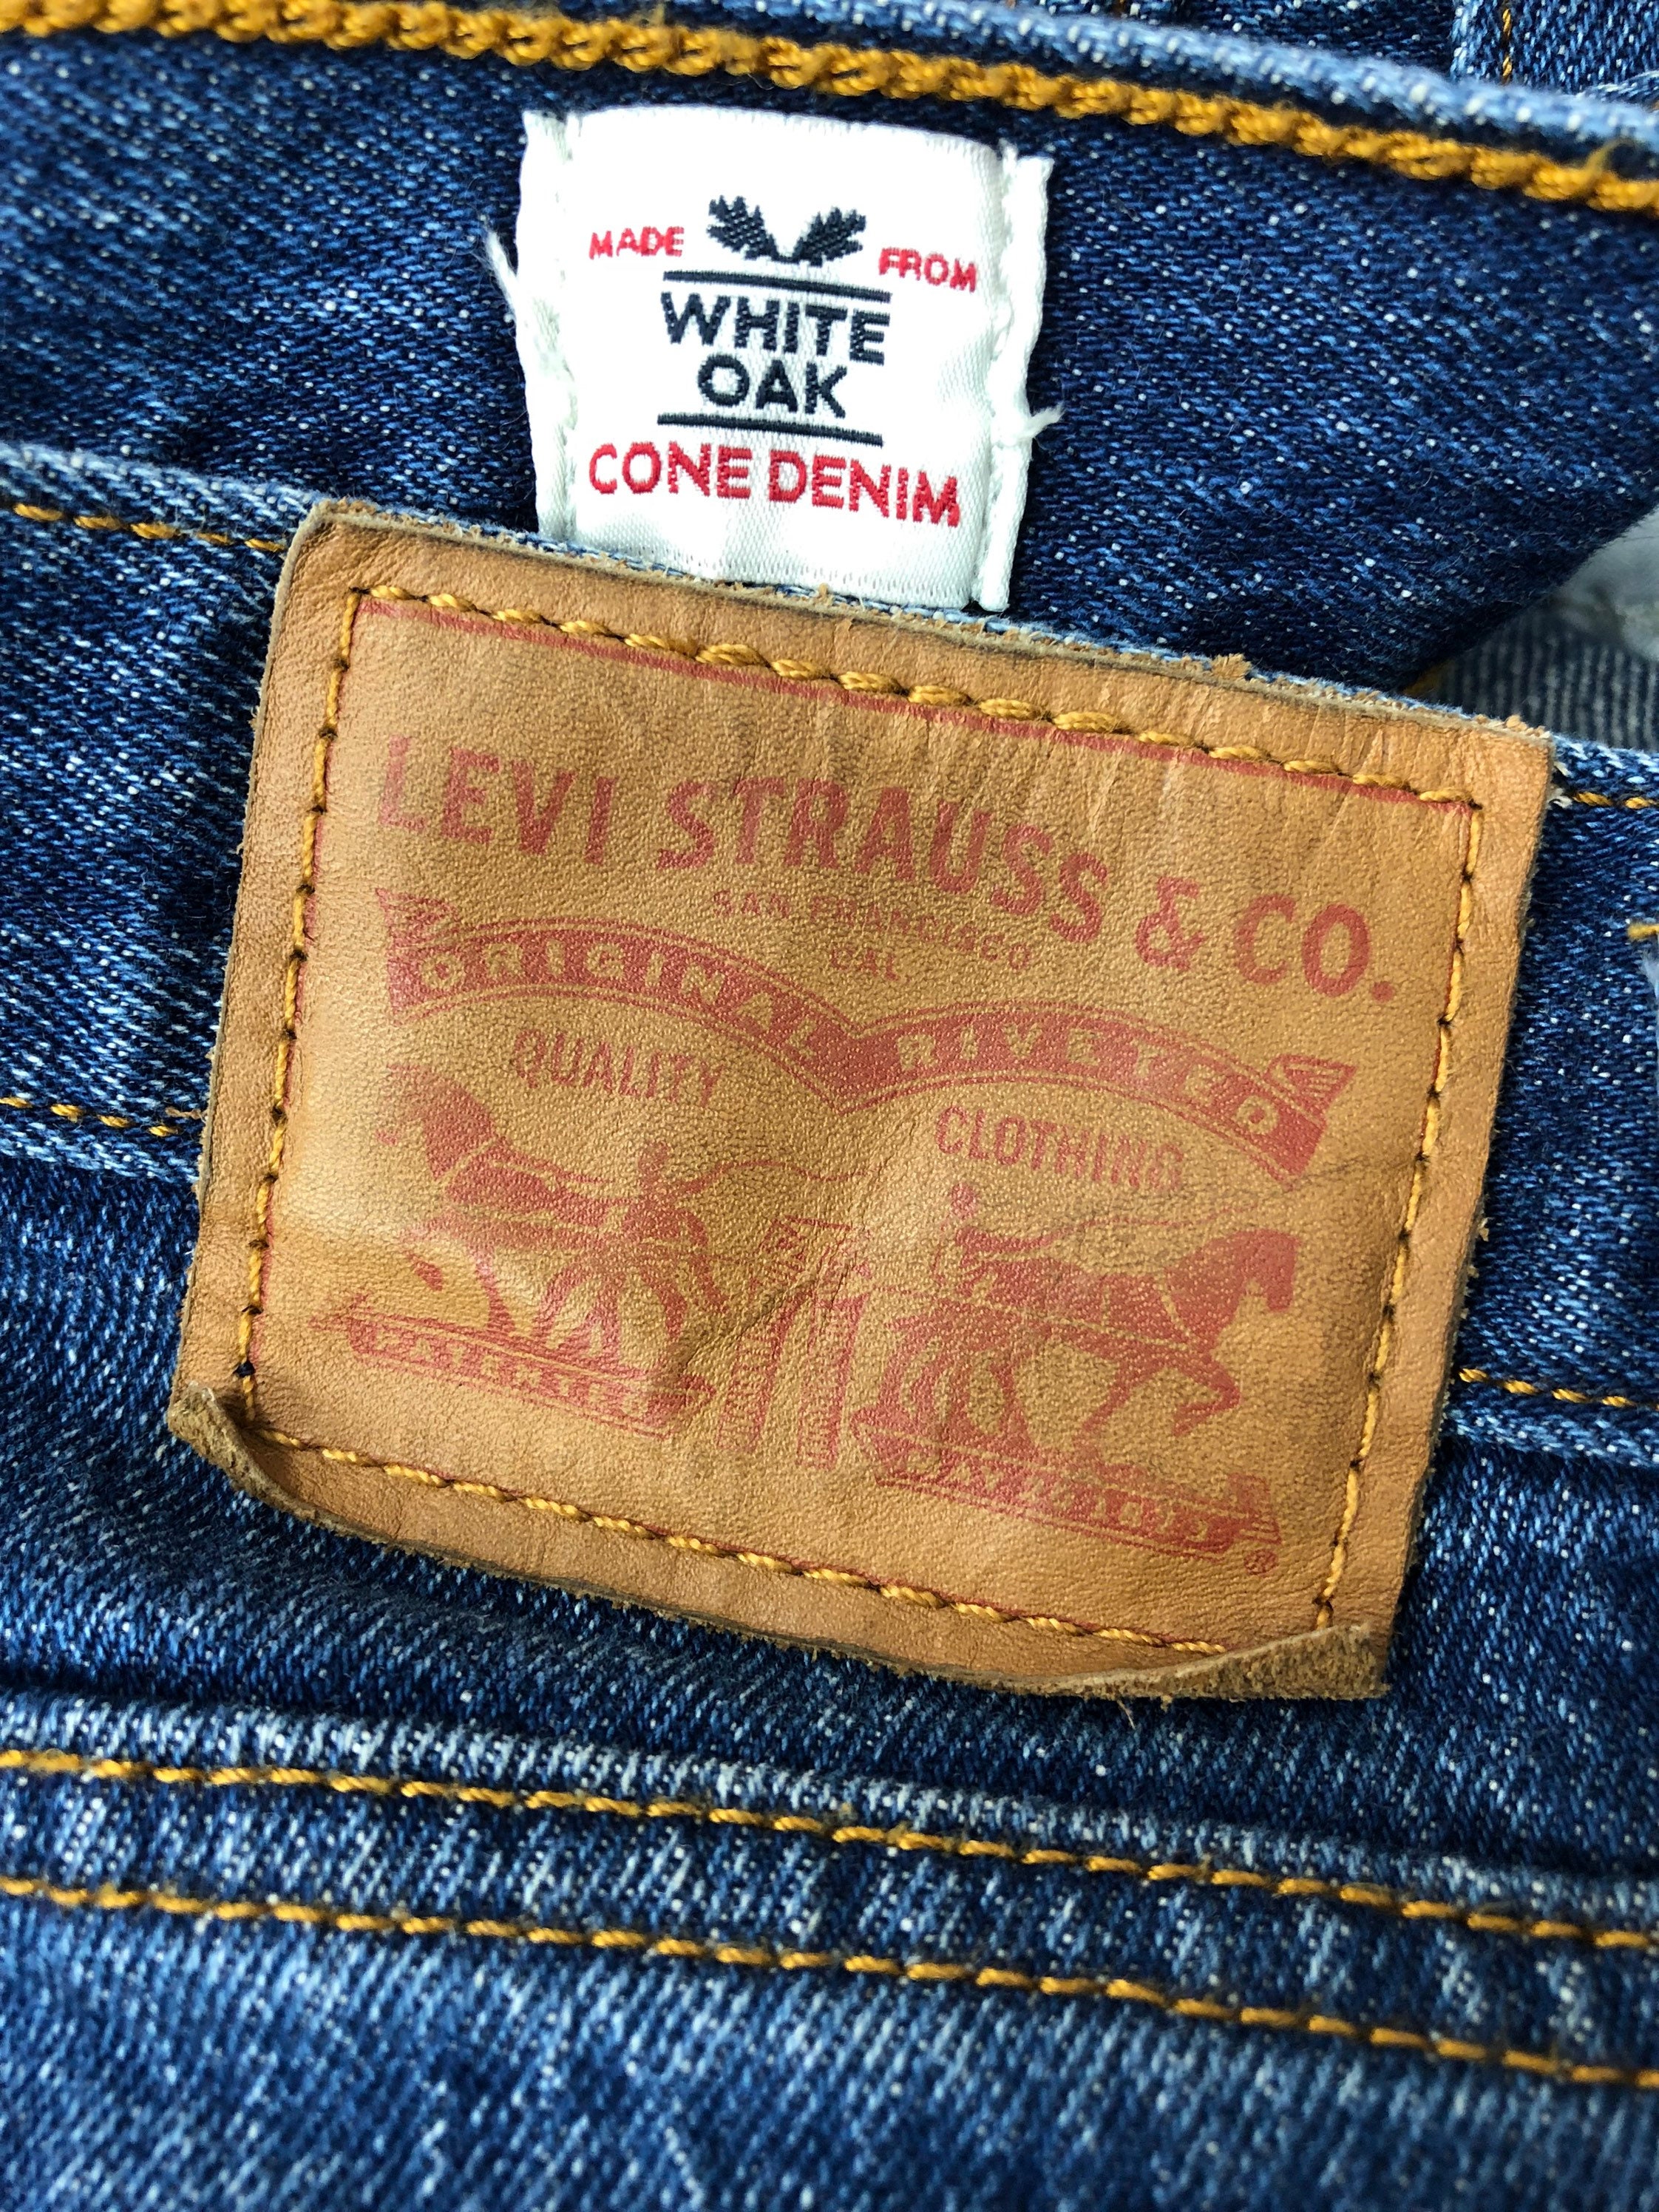 28x26.5 Levis White Oak Edition Skinny Jeans in a Mid Etsy